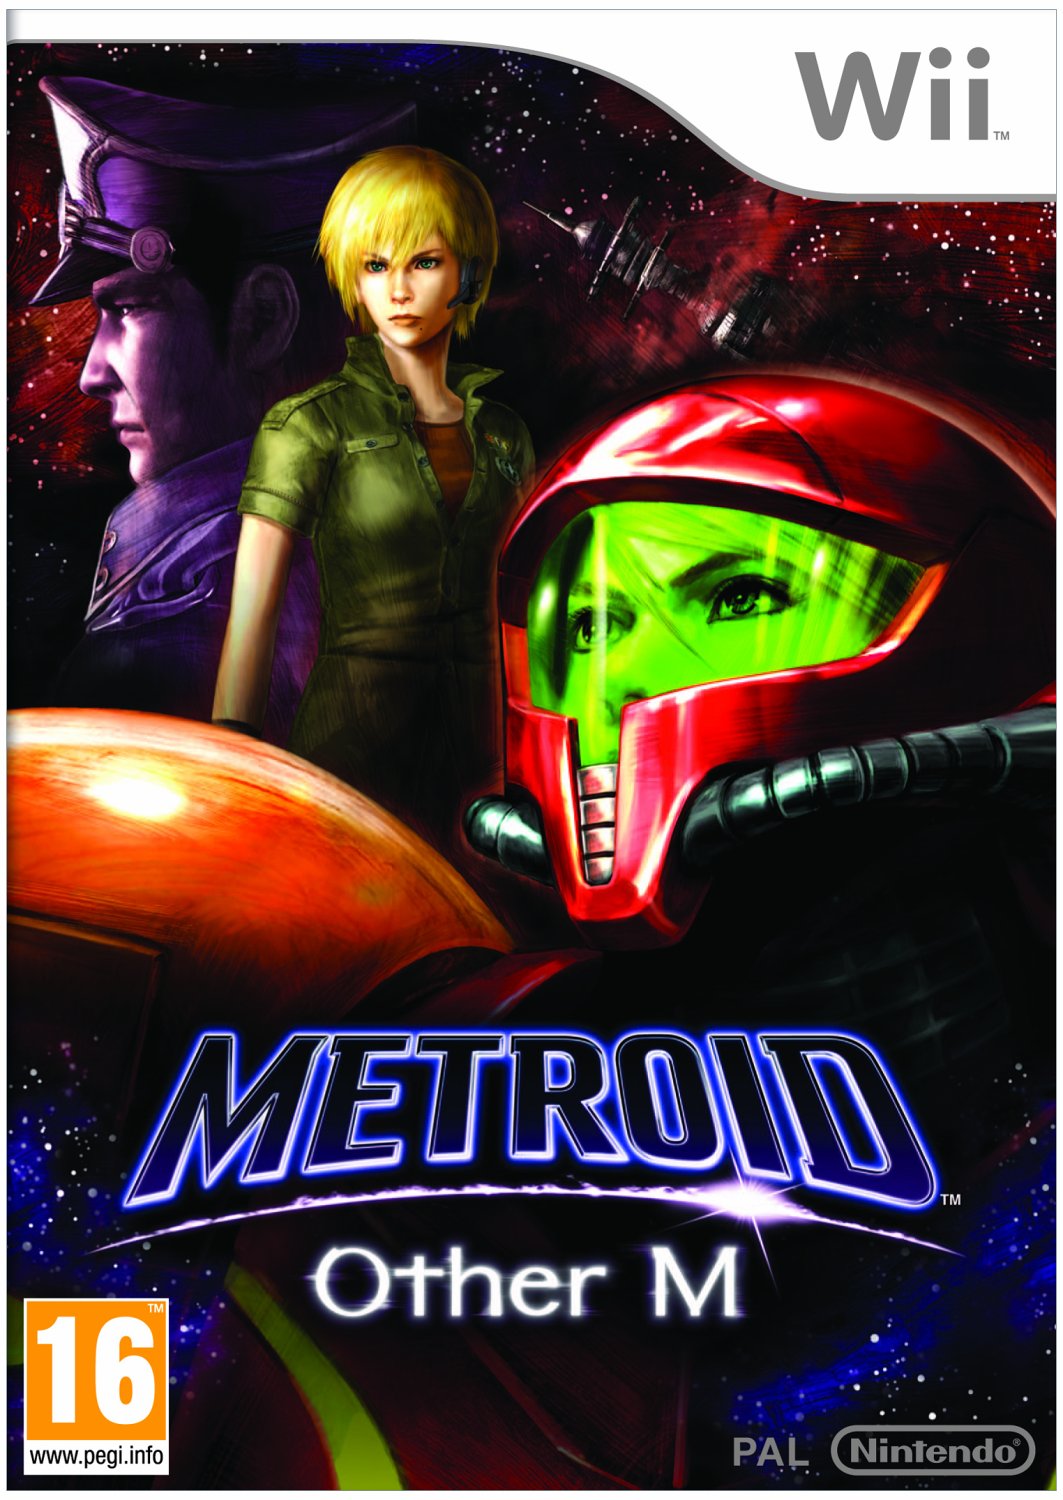 Metroid Other M Poster